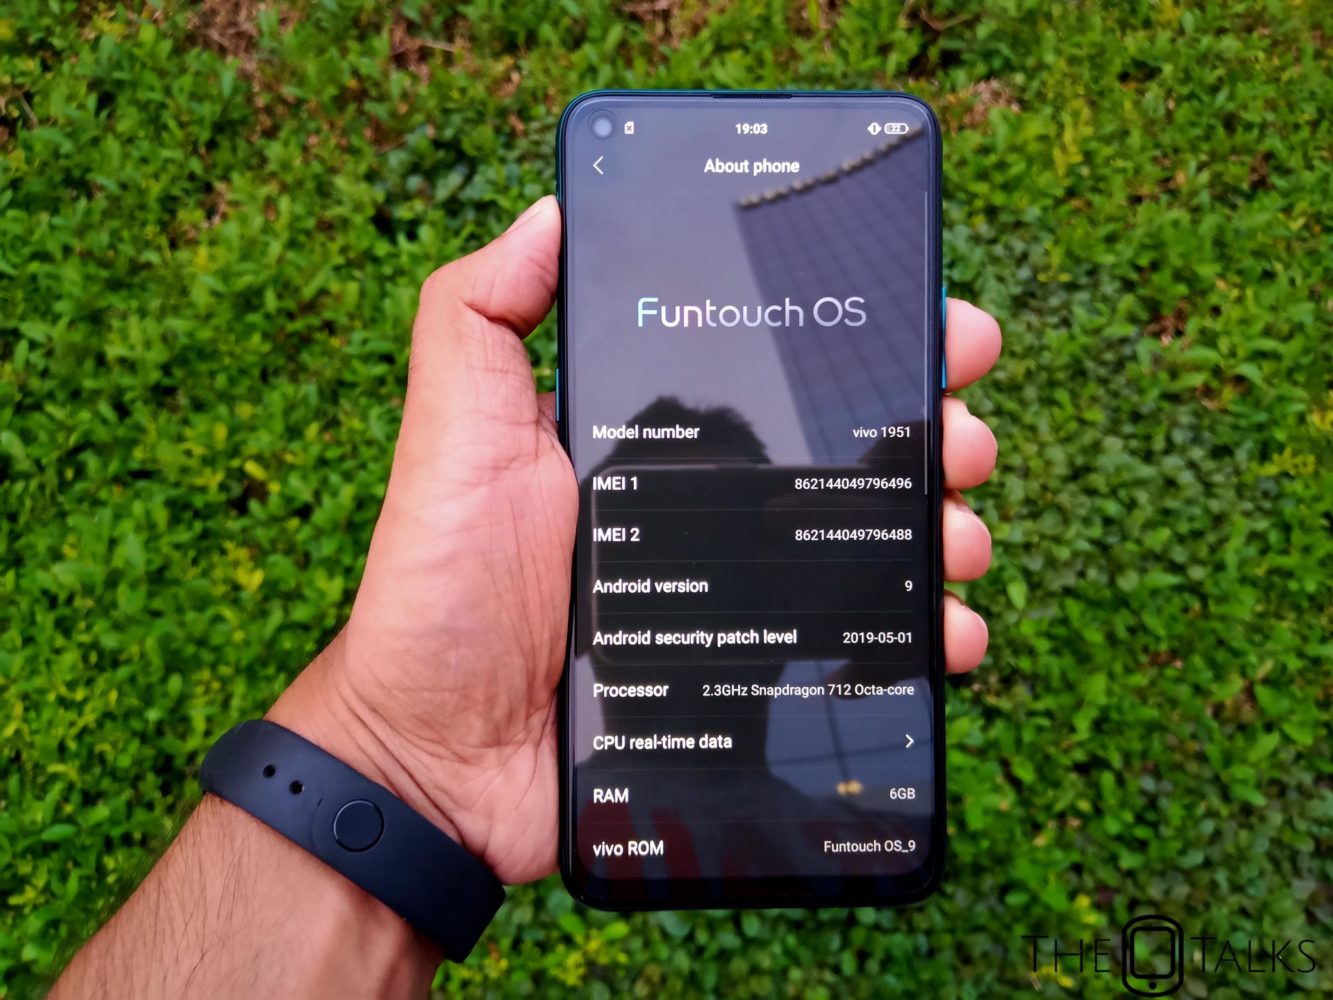 Functouch OS 9 Android Pie Vivo Z1 Pro